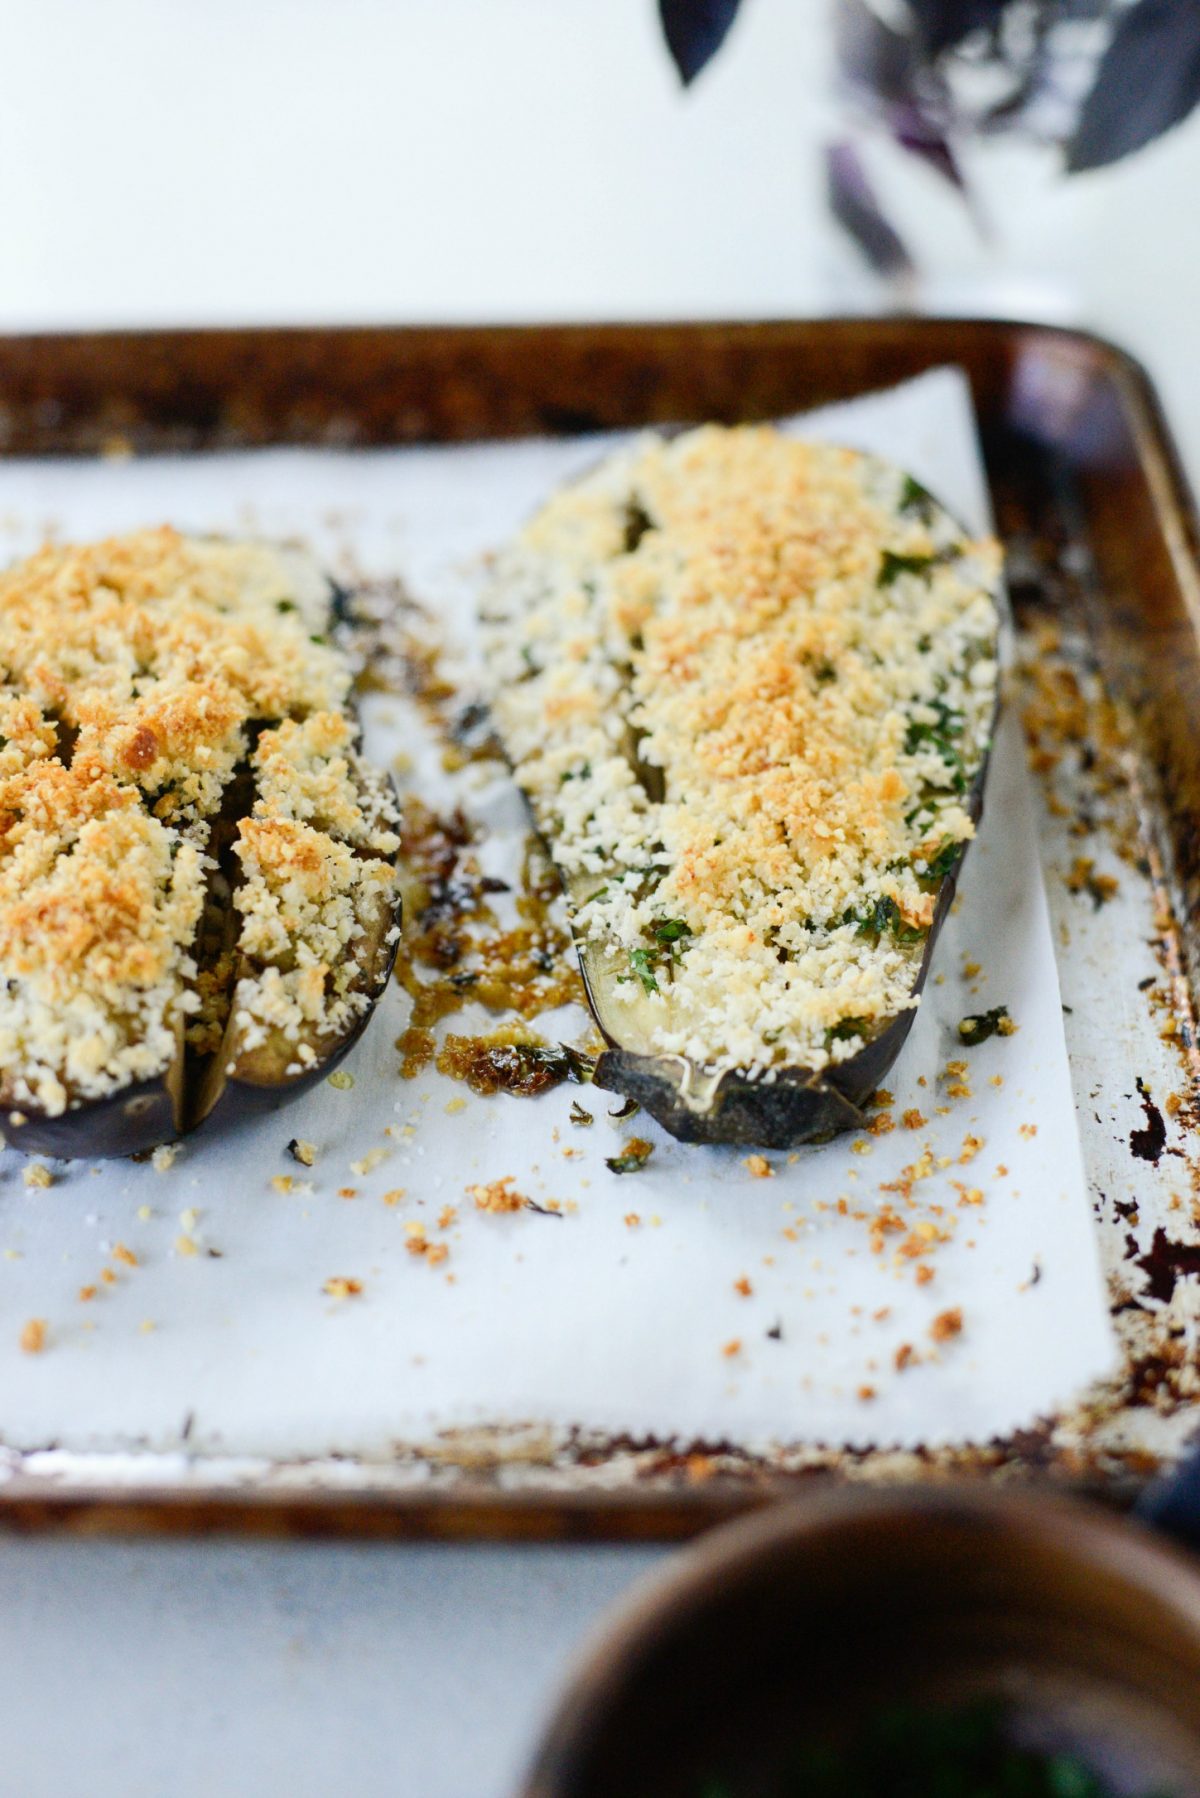 Baked Eggplant with Pecorino Crumbs out of the oven.